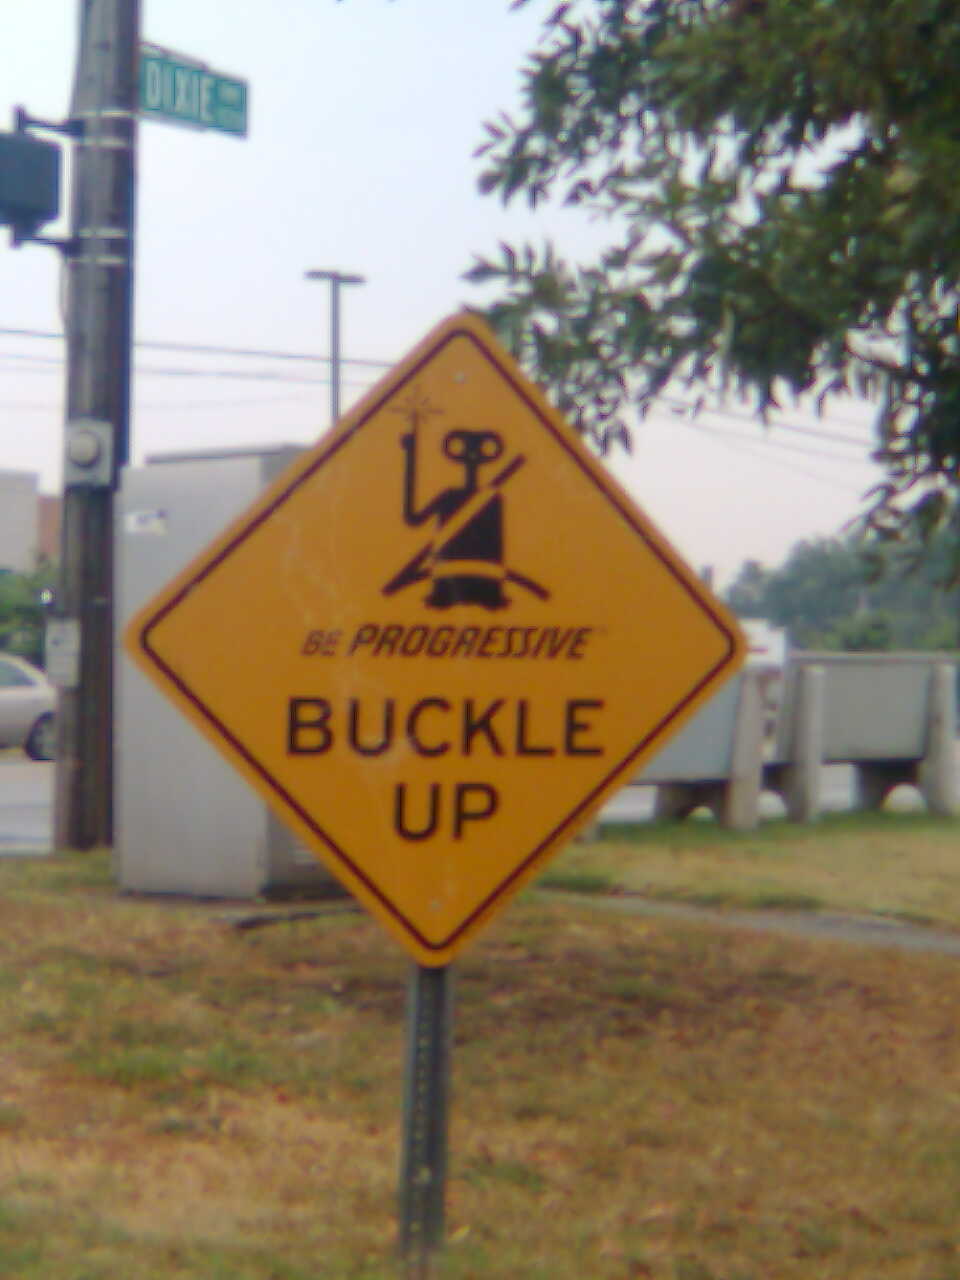 This sign is in Louisville Ky....ET?? WTF??